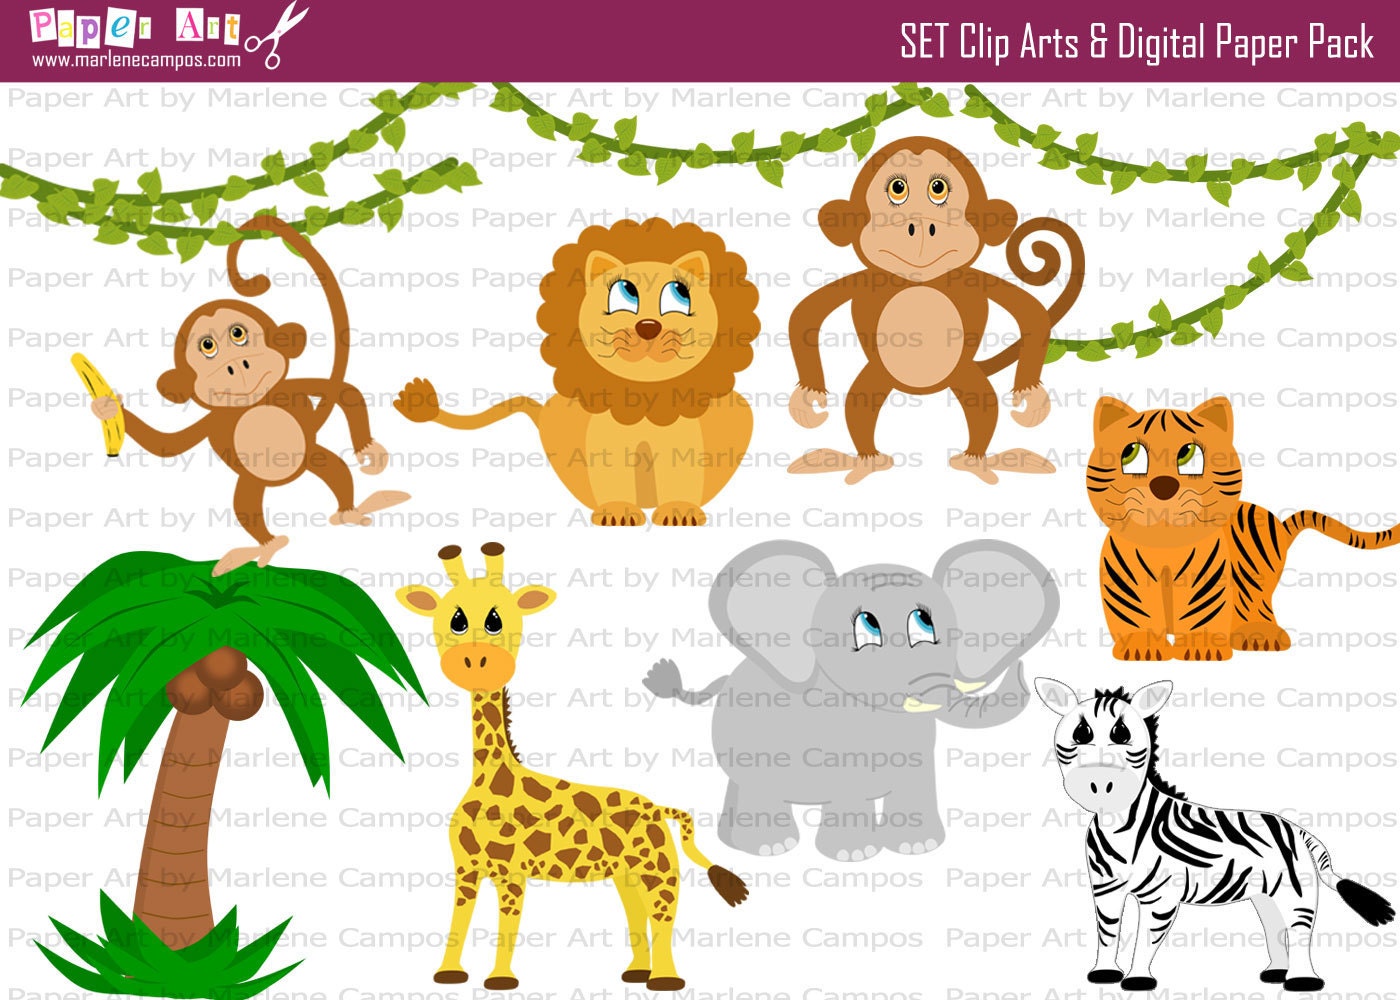 clipart party animals - photo #42